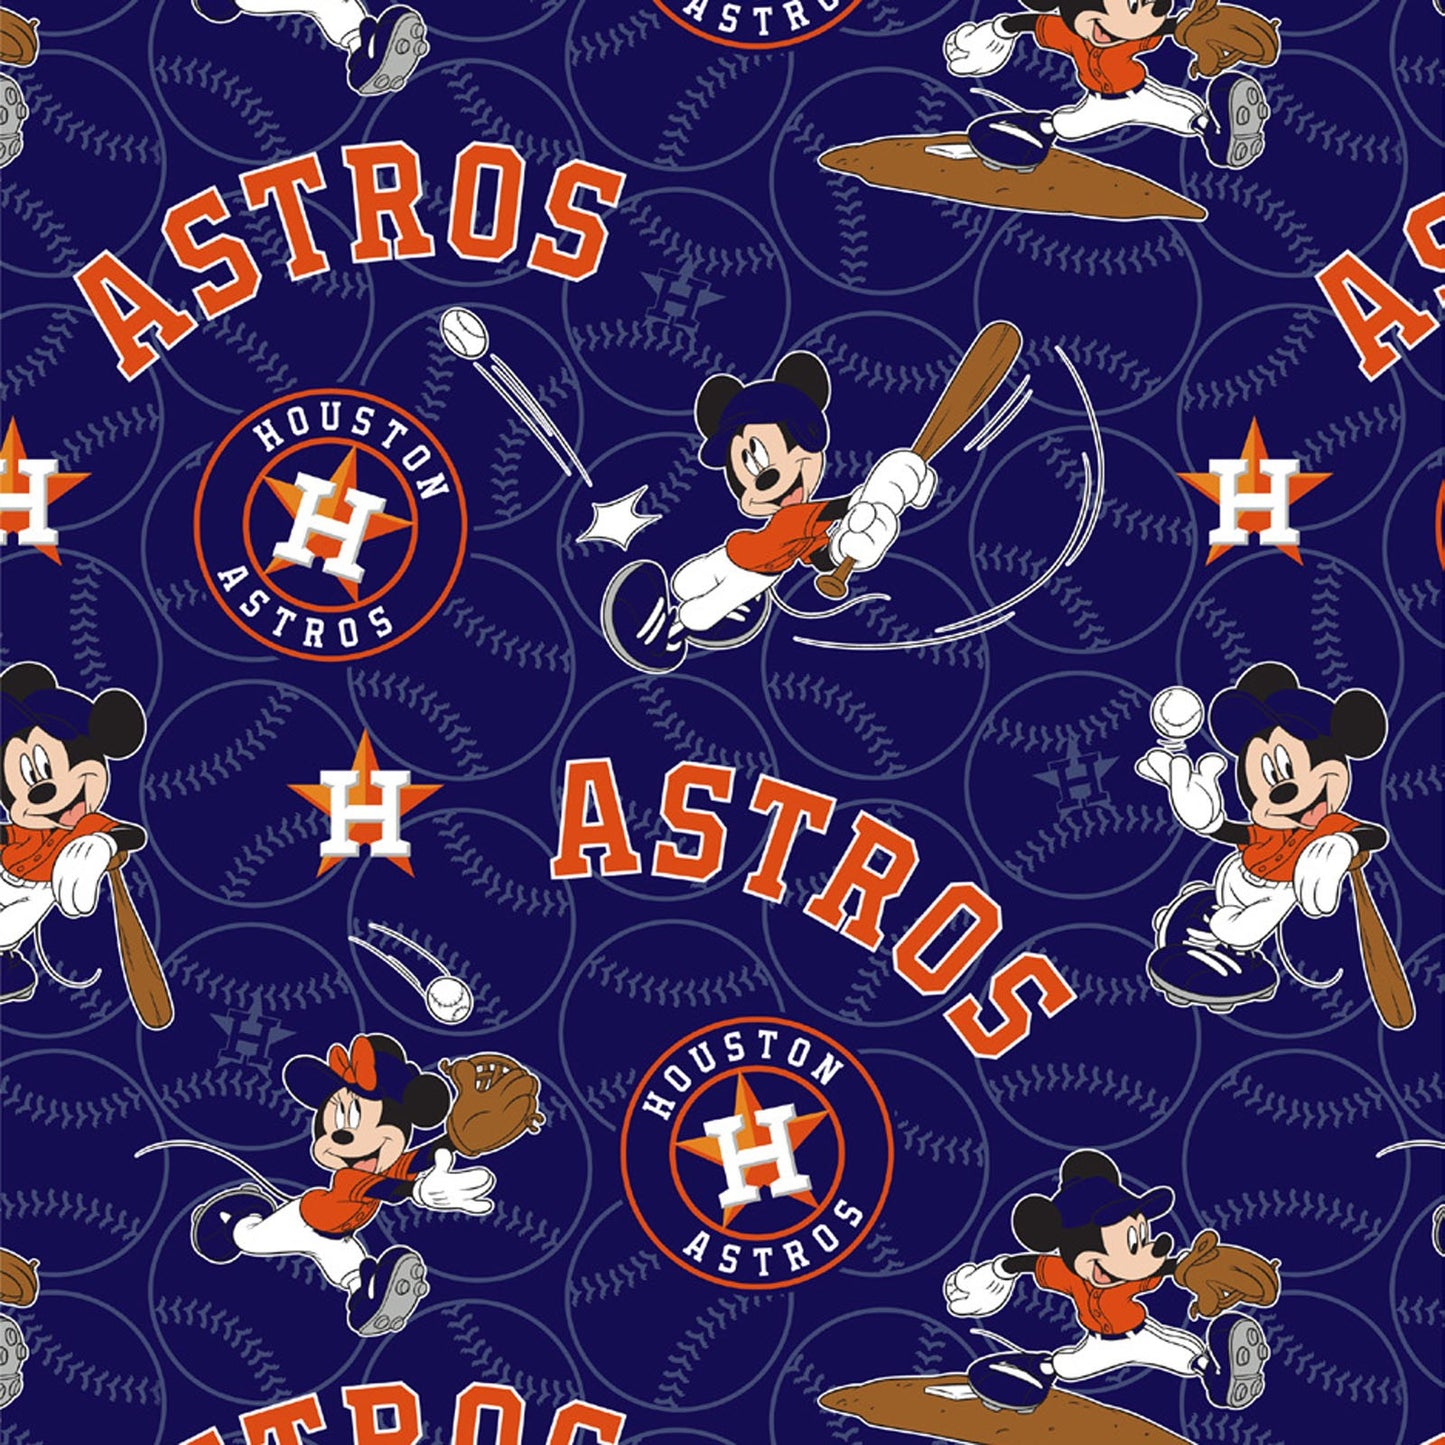 44 x 36 Licensed MLB Houston Astros Disney Baby on Blue Fabric Traditions 100% Cotton